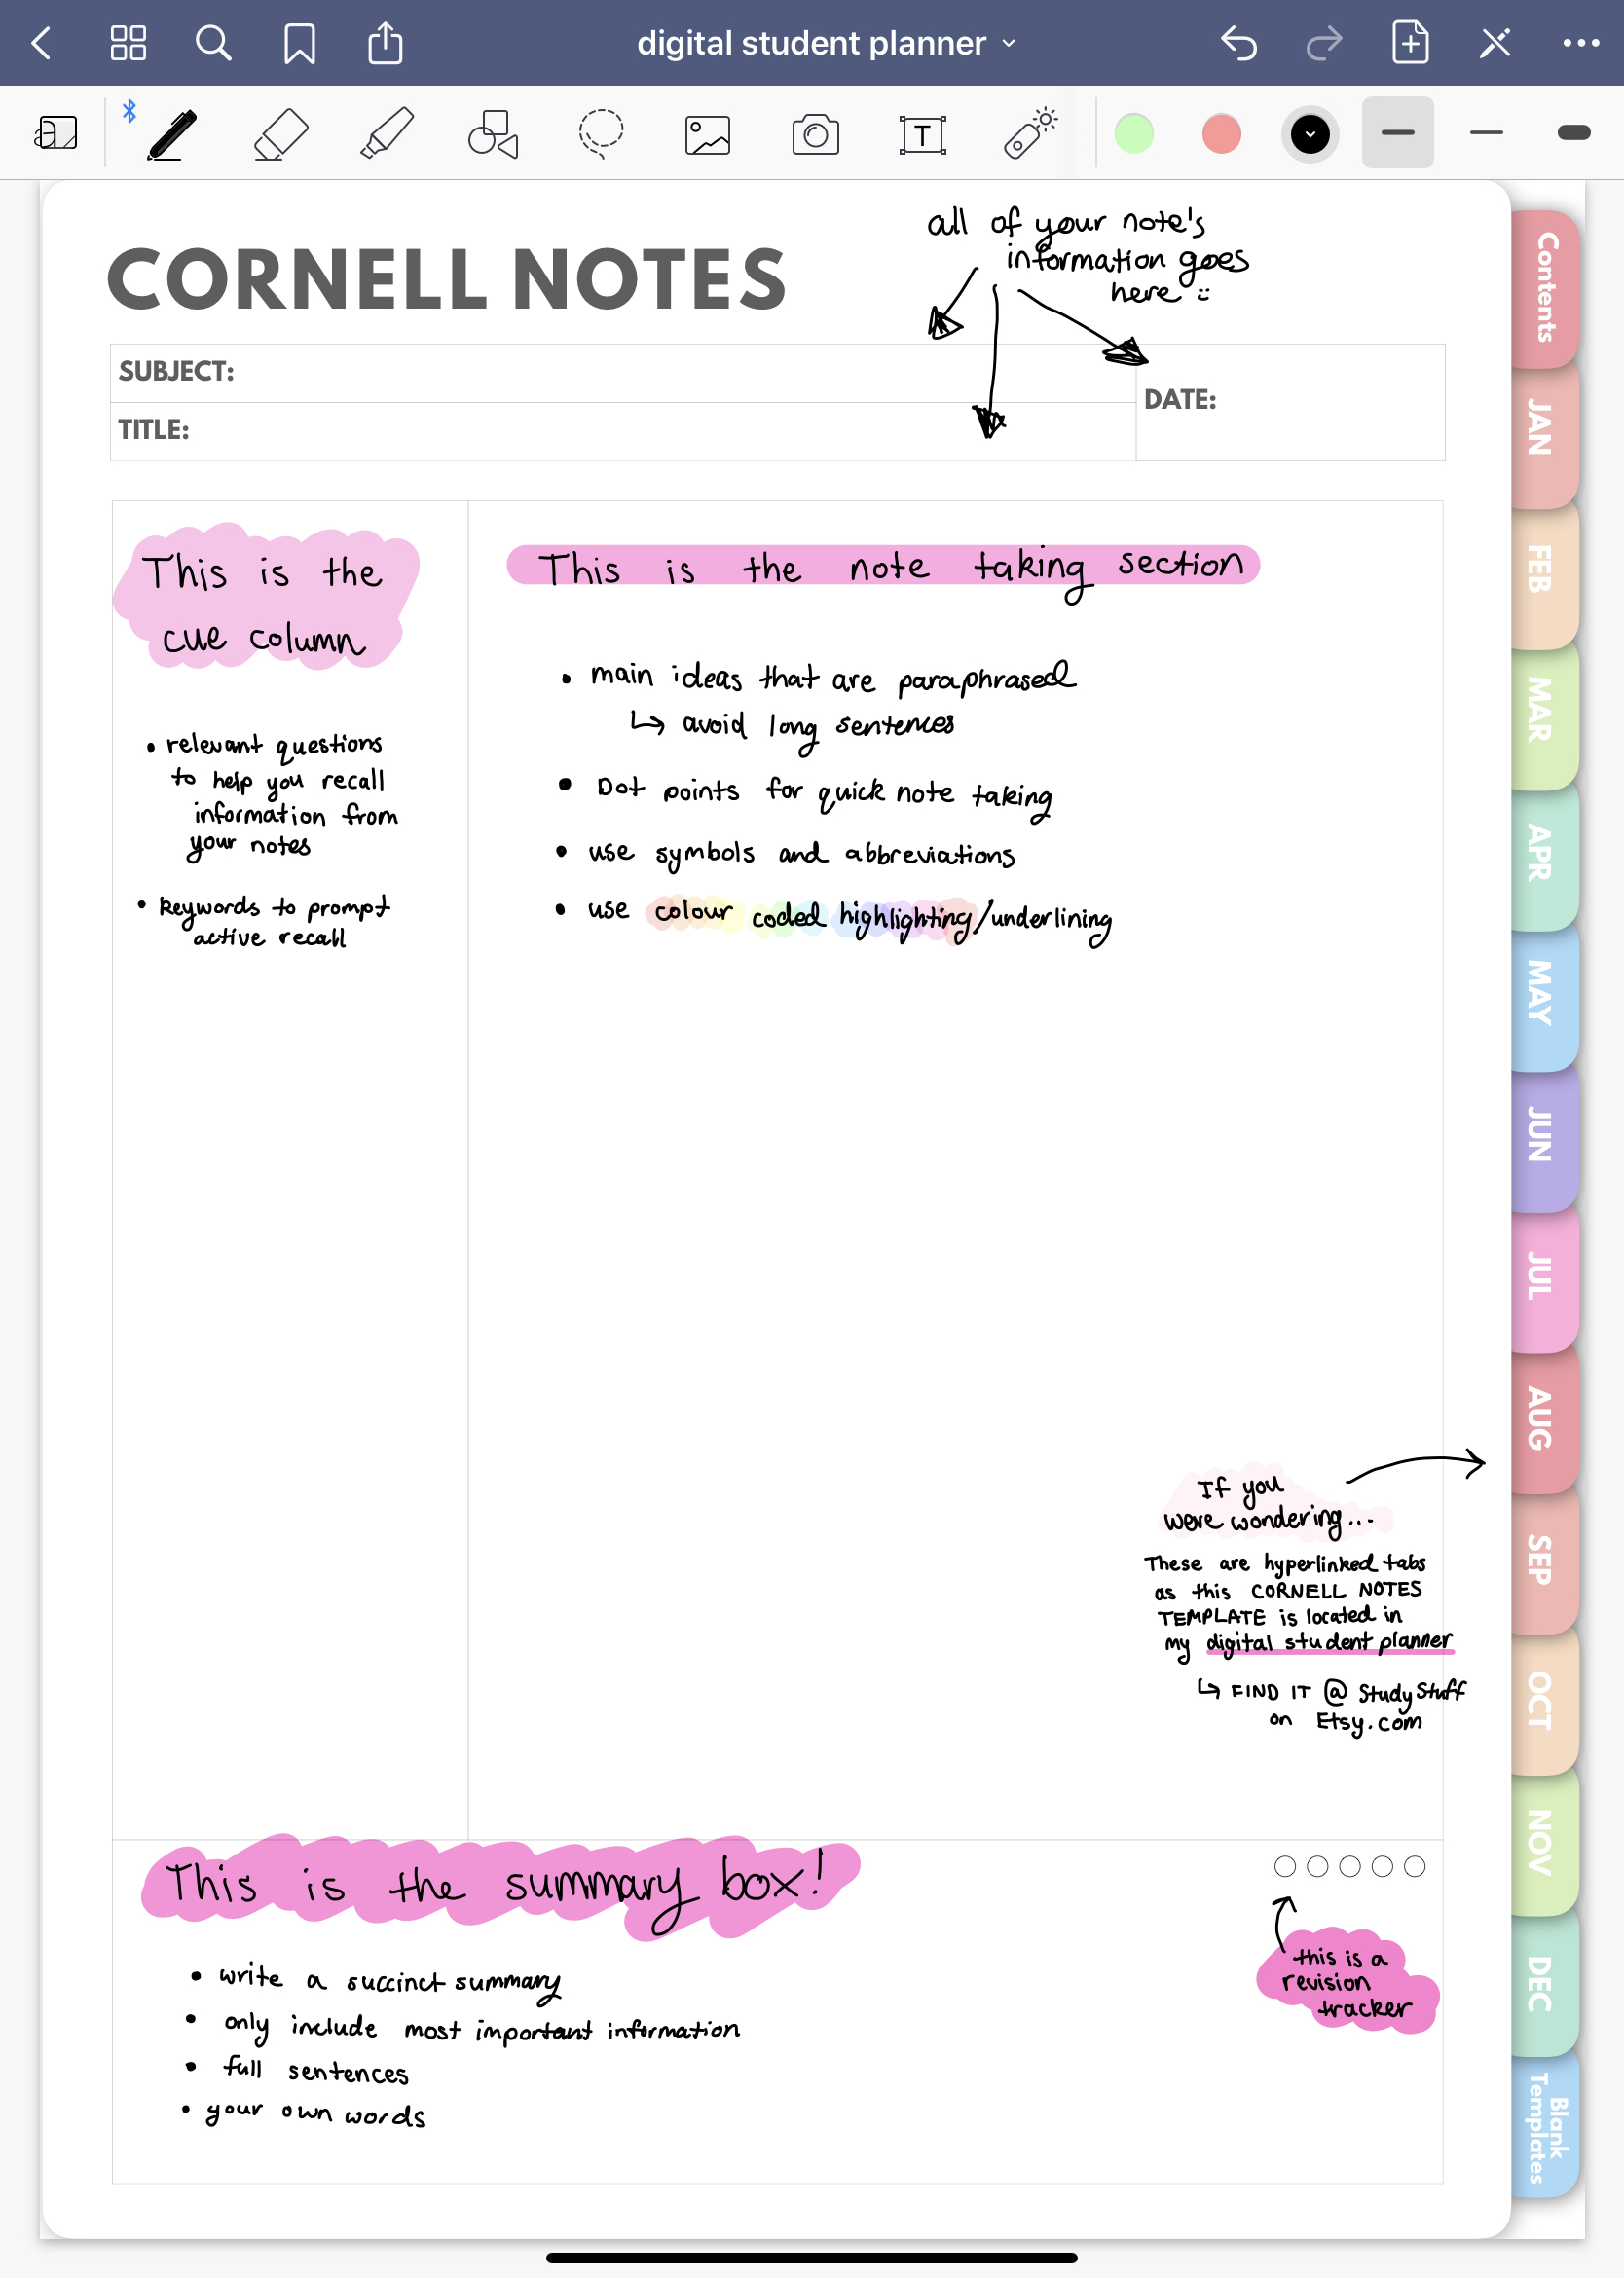 The Ultimate Guide To Taking Studying Cornell Notes StudyStuff